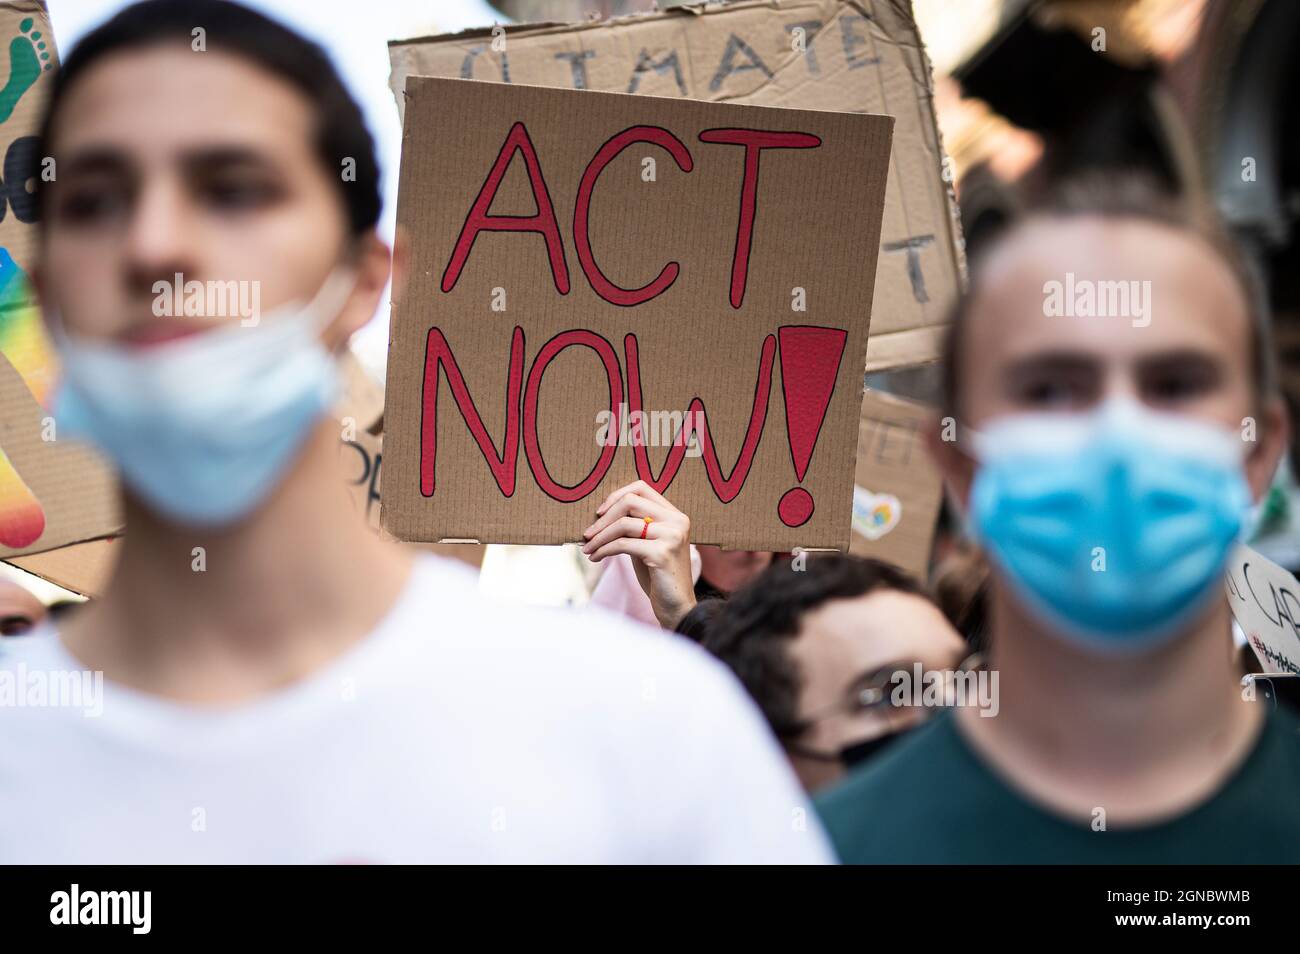 Turin, Italy. 24 September 2021. A placard reading 'Act now!' is seen during 'Fridays for future' demonstration, a worldwide climate strike against governmental inaction towards climate breakdown and environmental pollution. Credit: Nicolò Campo/Alamy Live News Stock Photo